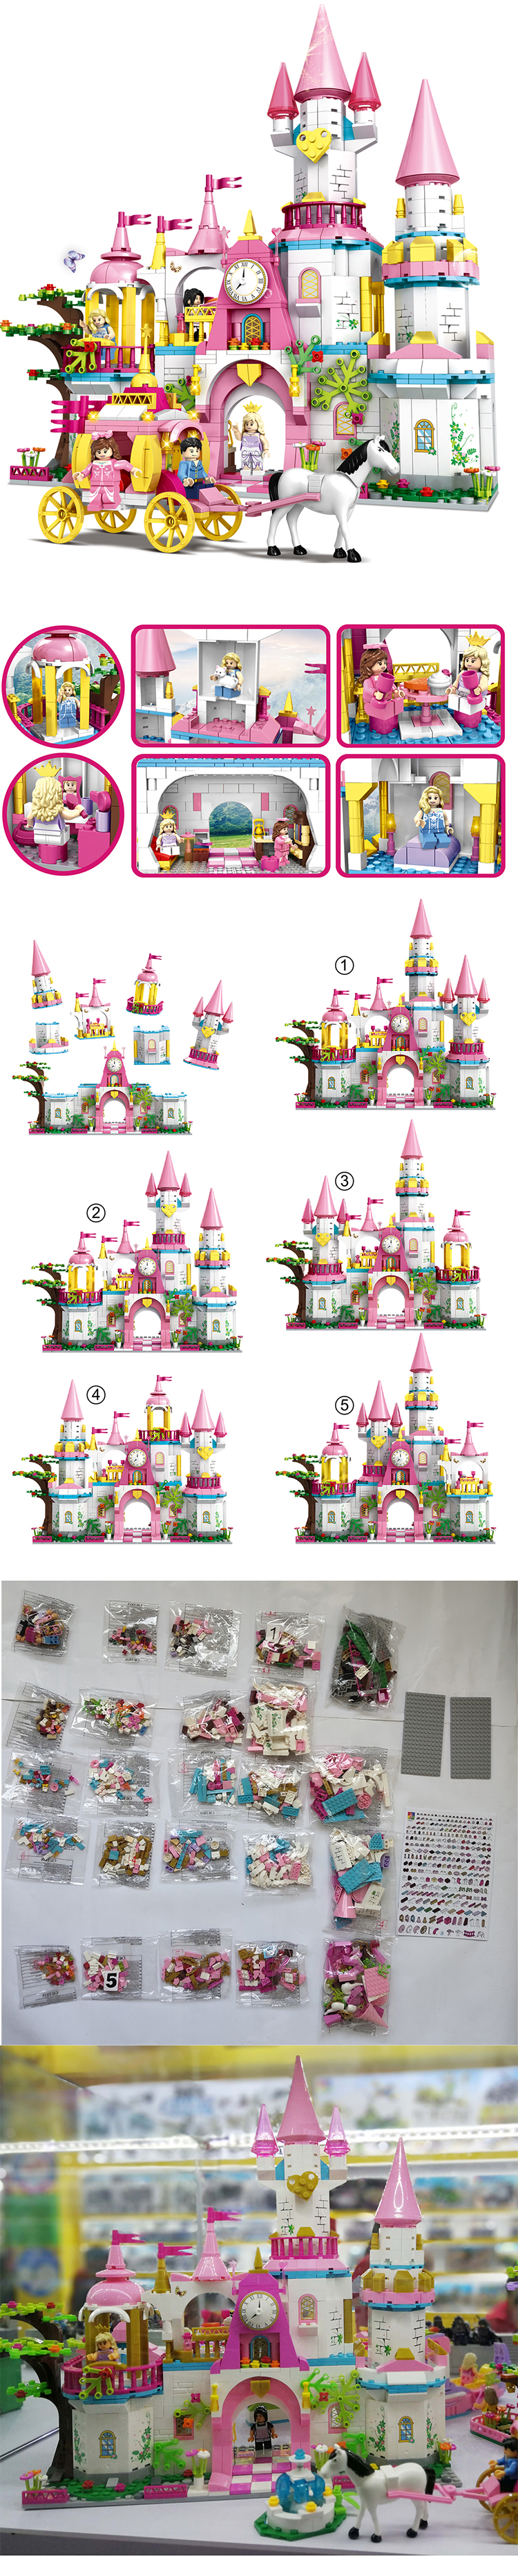 WOMA TOYS Wholesale Supplier Christmas gift for child Princess Prince Castle forest carriage Building Blocks Model toys set